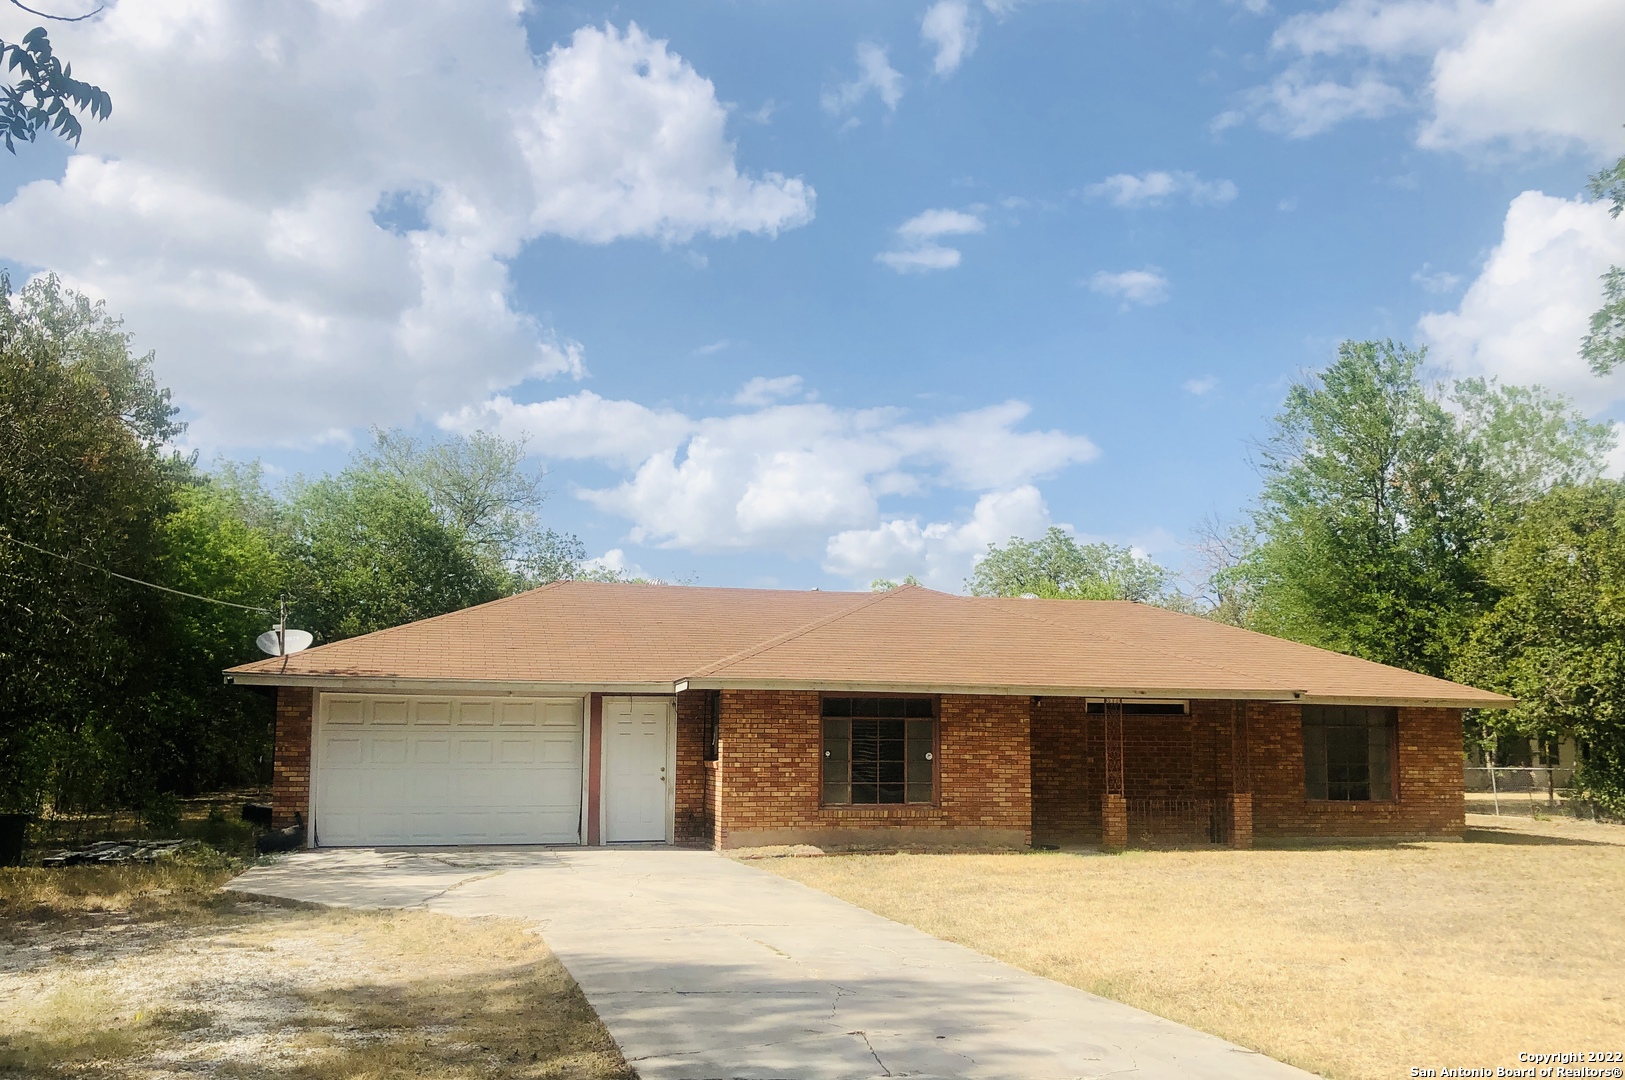 This is the property your clients are looking for!   Spacious brick home nestled under nice big shade trees. Home sits on approximately 1 acre. Property is completely fenced in. Convenient location near major highways, restaurants and shopping centers. Only minutes from downtown & AT&T Center. Show this one, today!